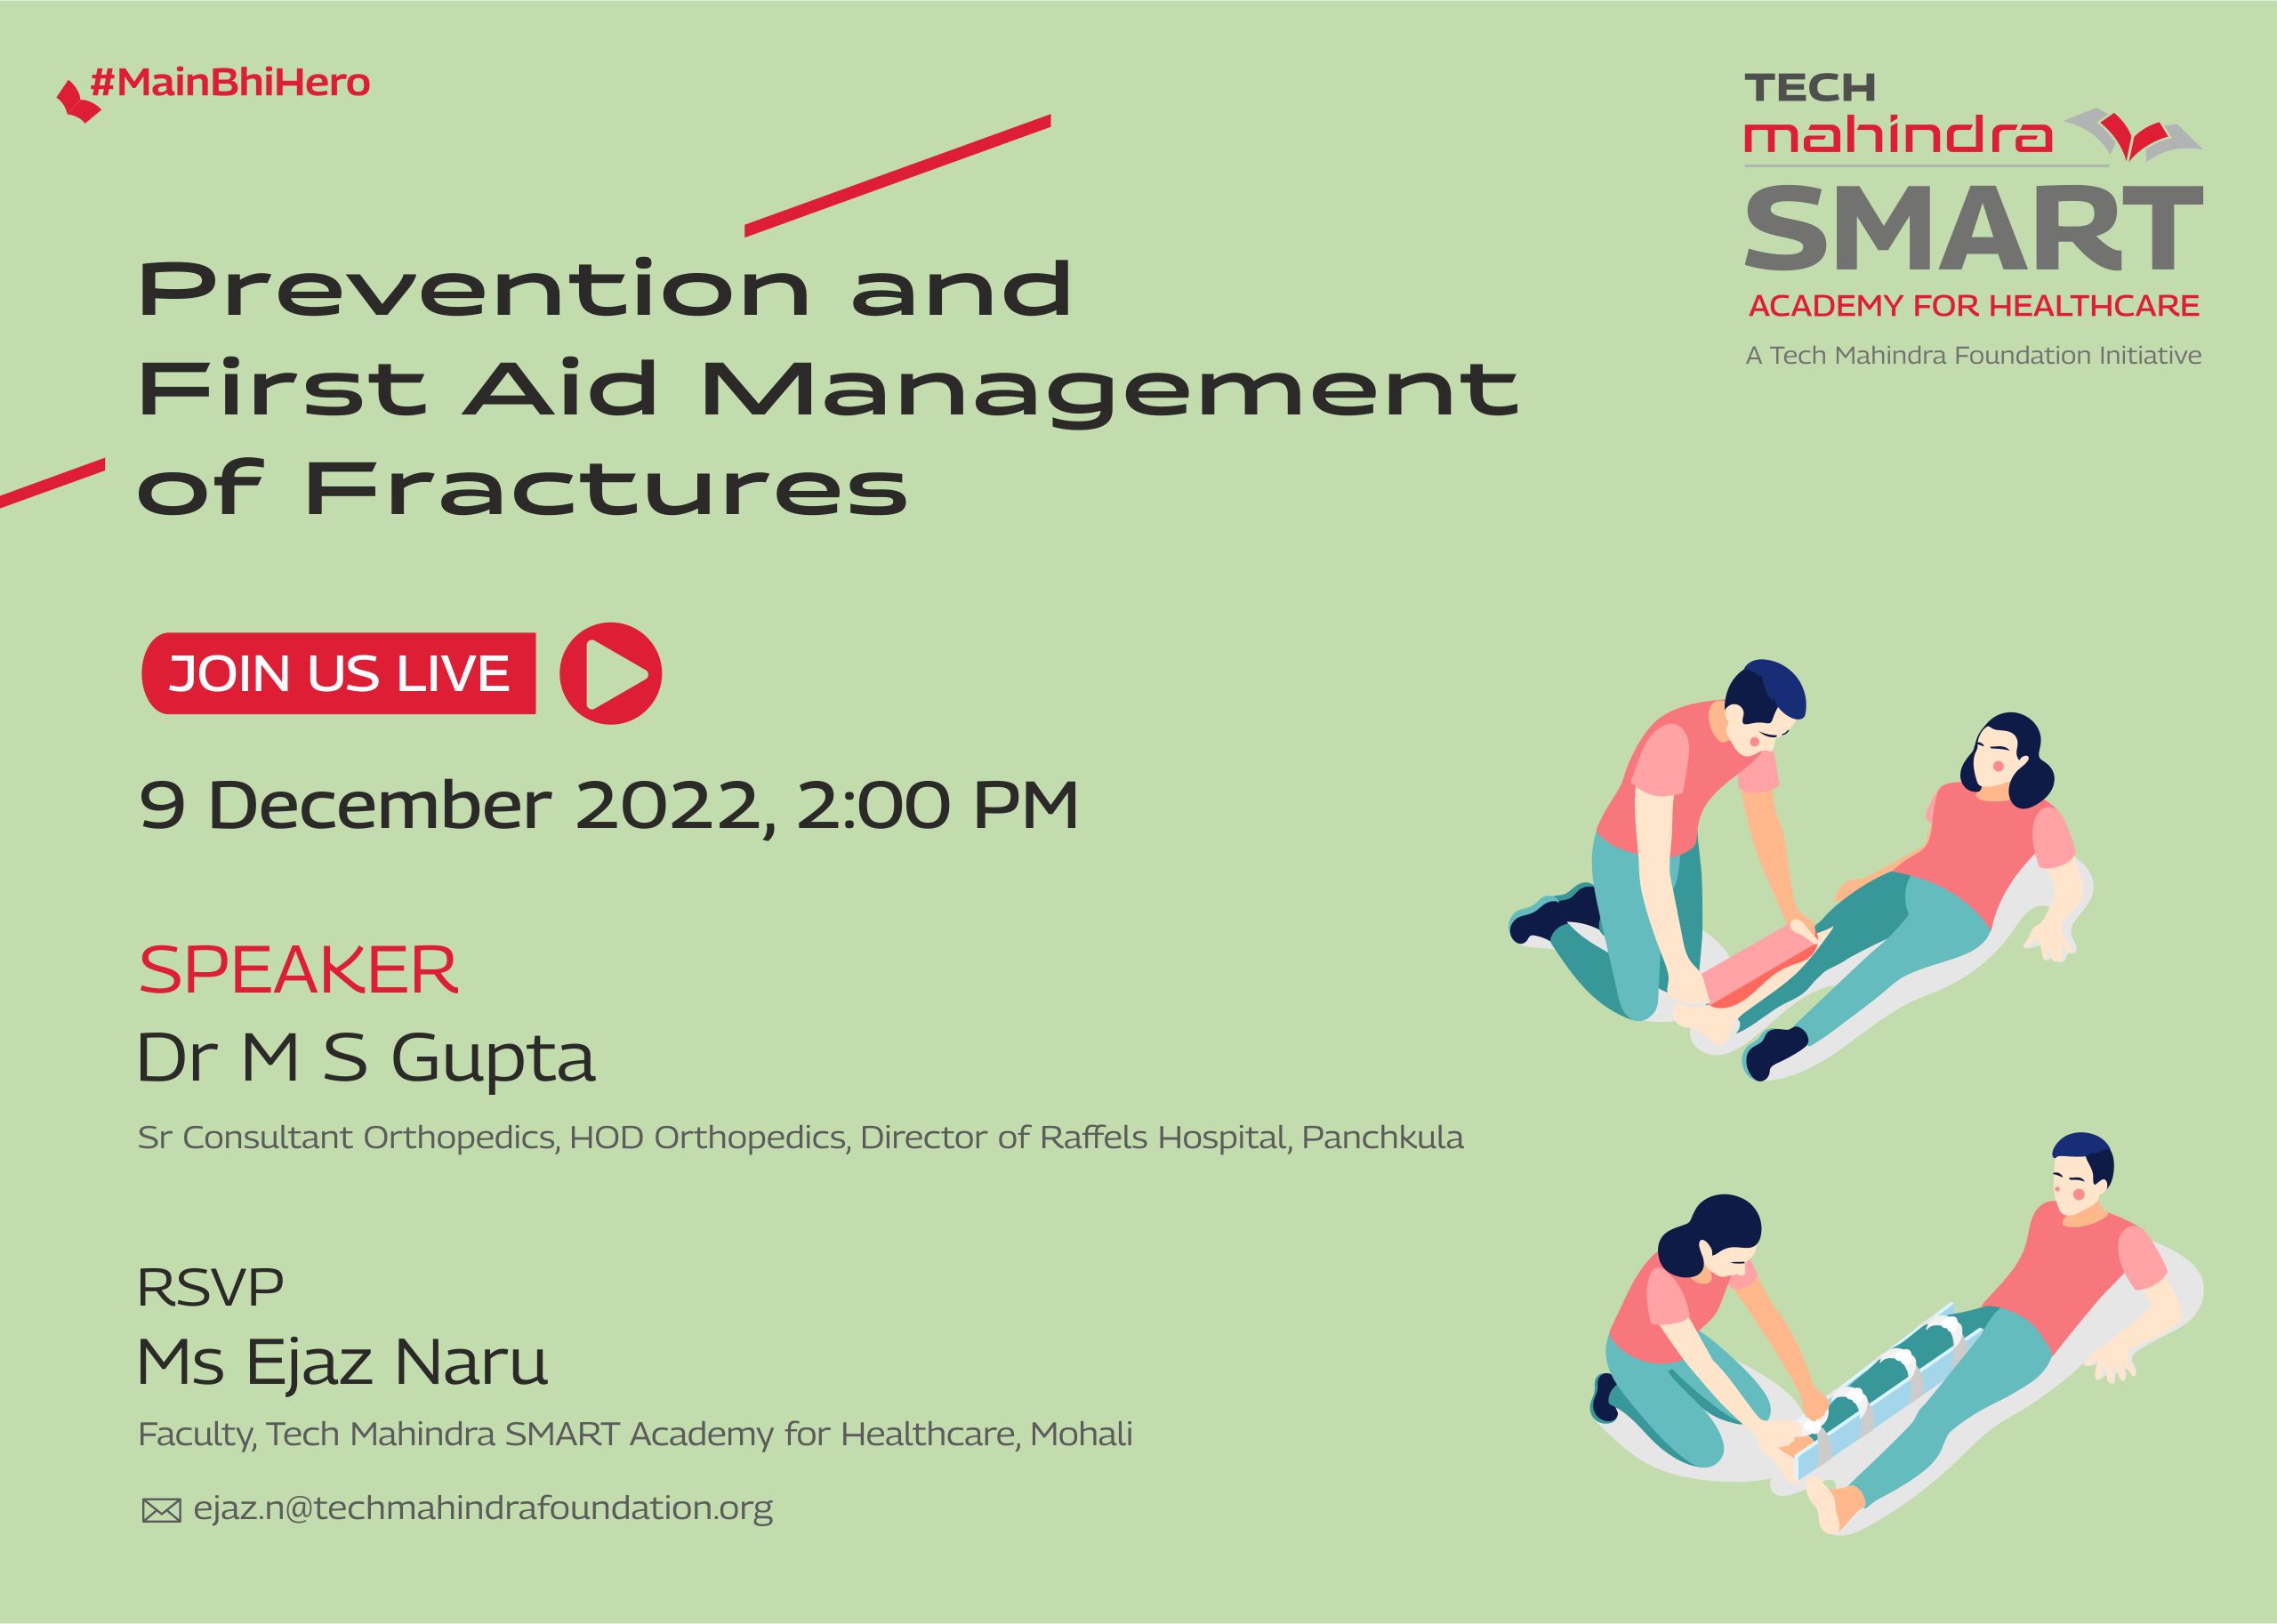 Prevention and First Aid Management of Fractures